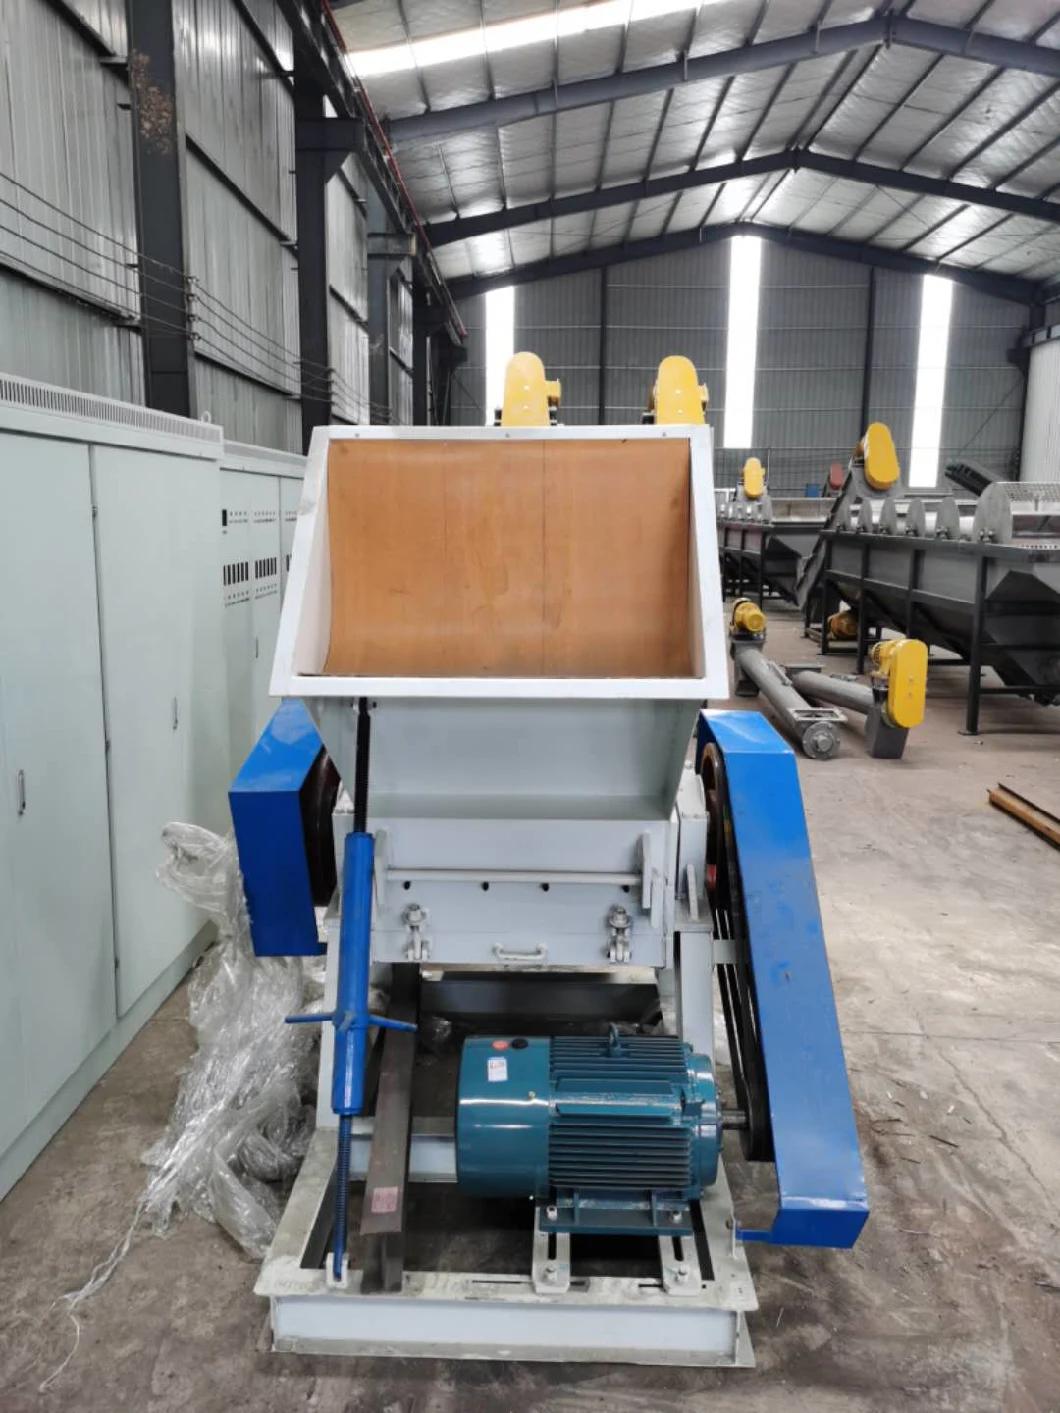 Crusher for Film Especial for Recycling The Buckets and Plastic Box